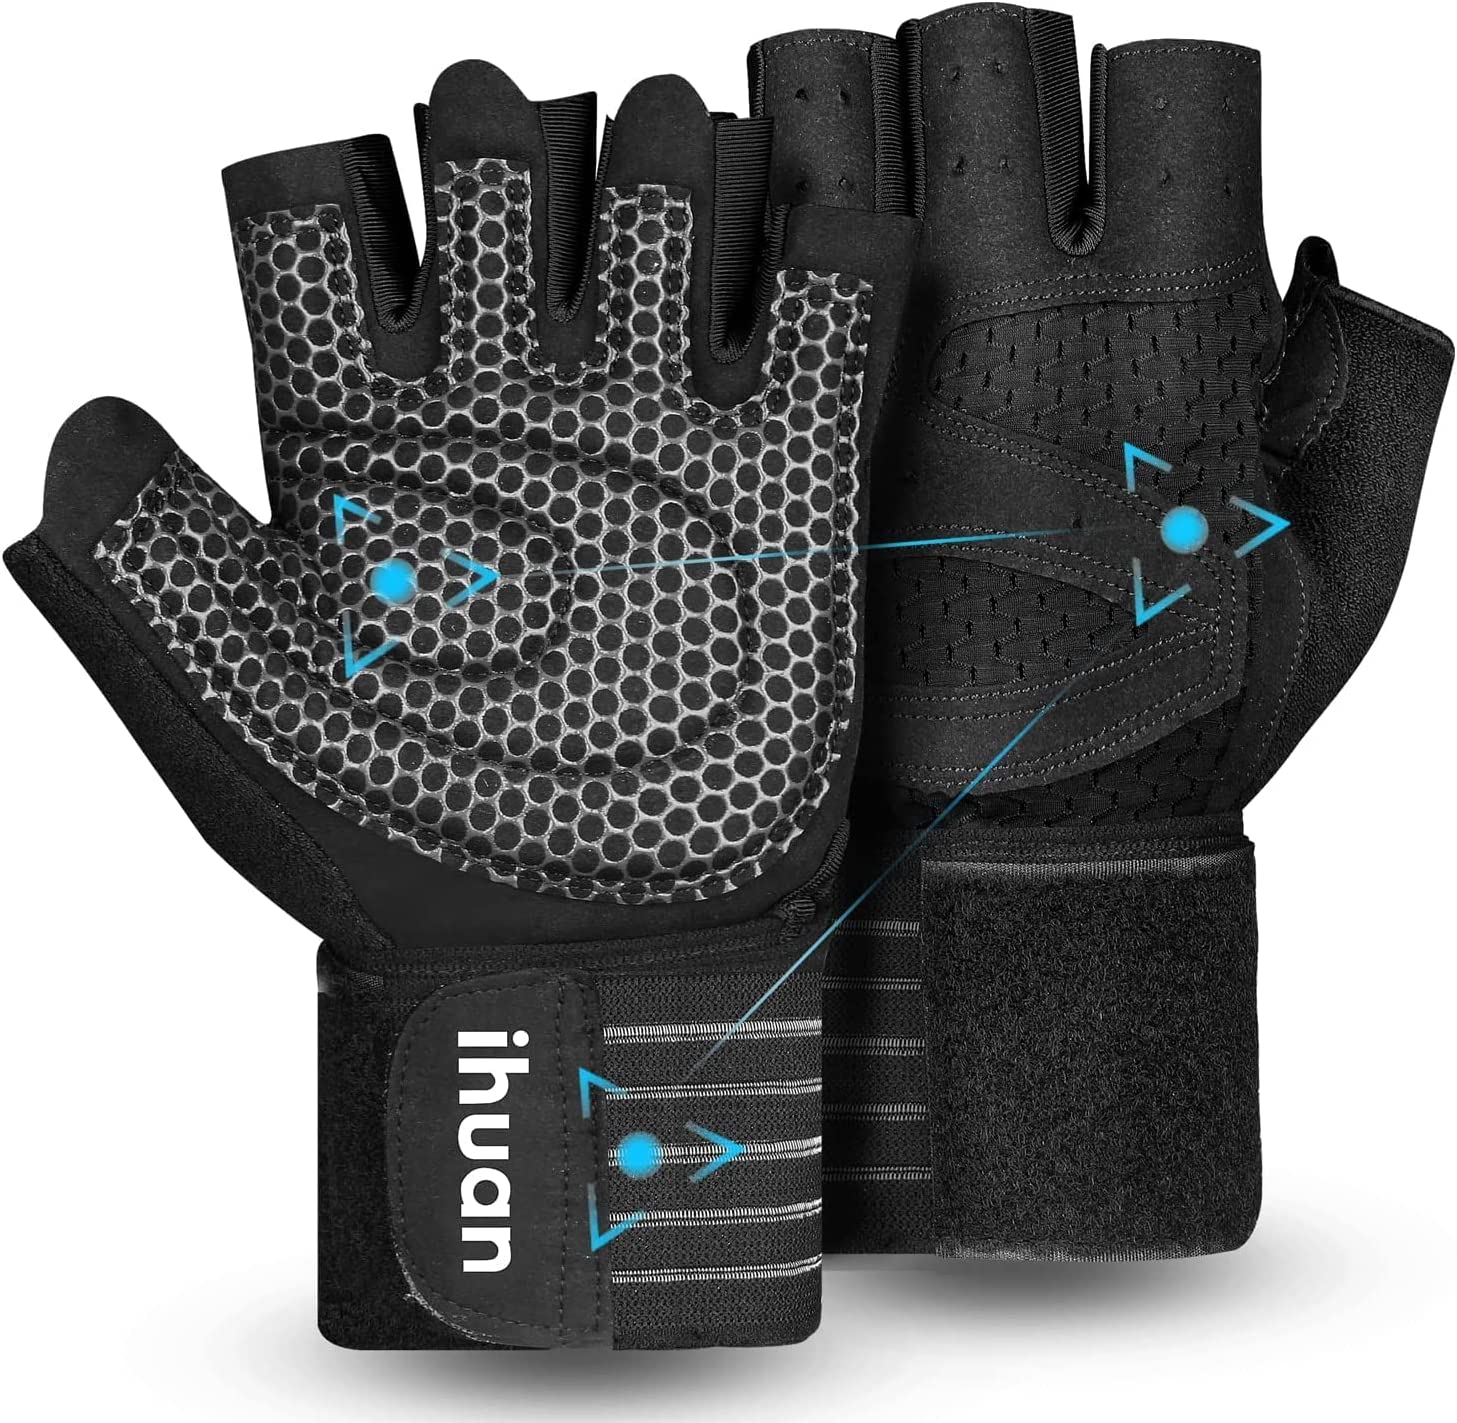 Ihuan Ventilated Weight Lifting Gym Workout Gloves - Amazon